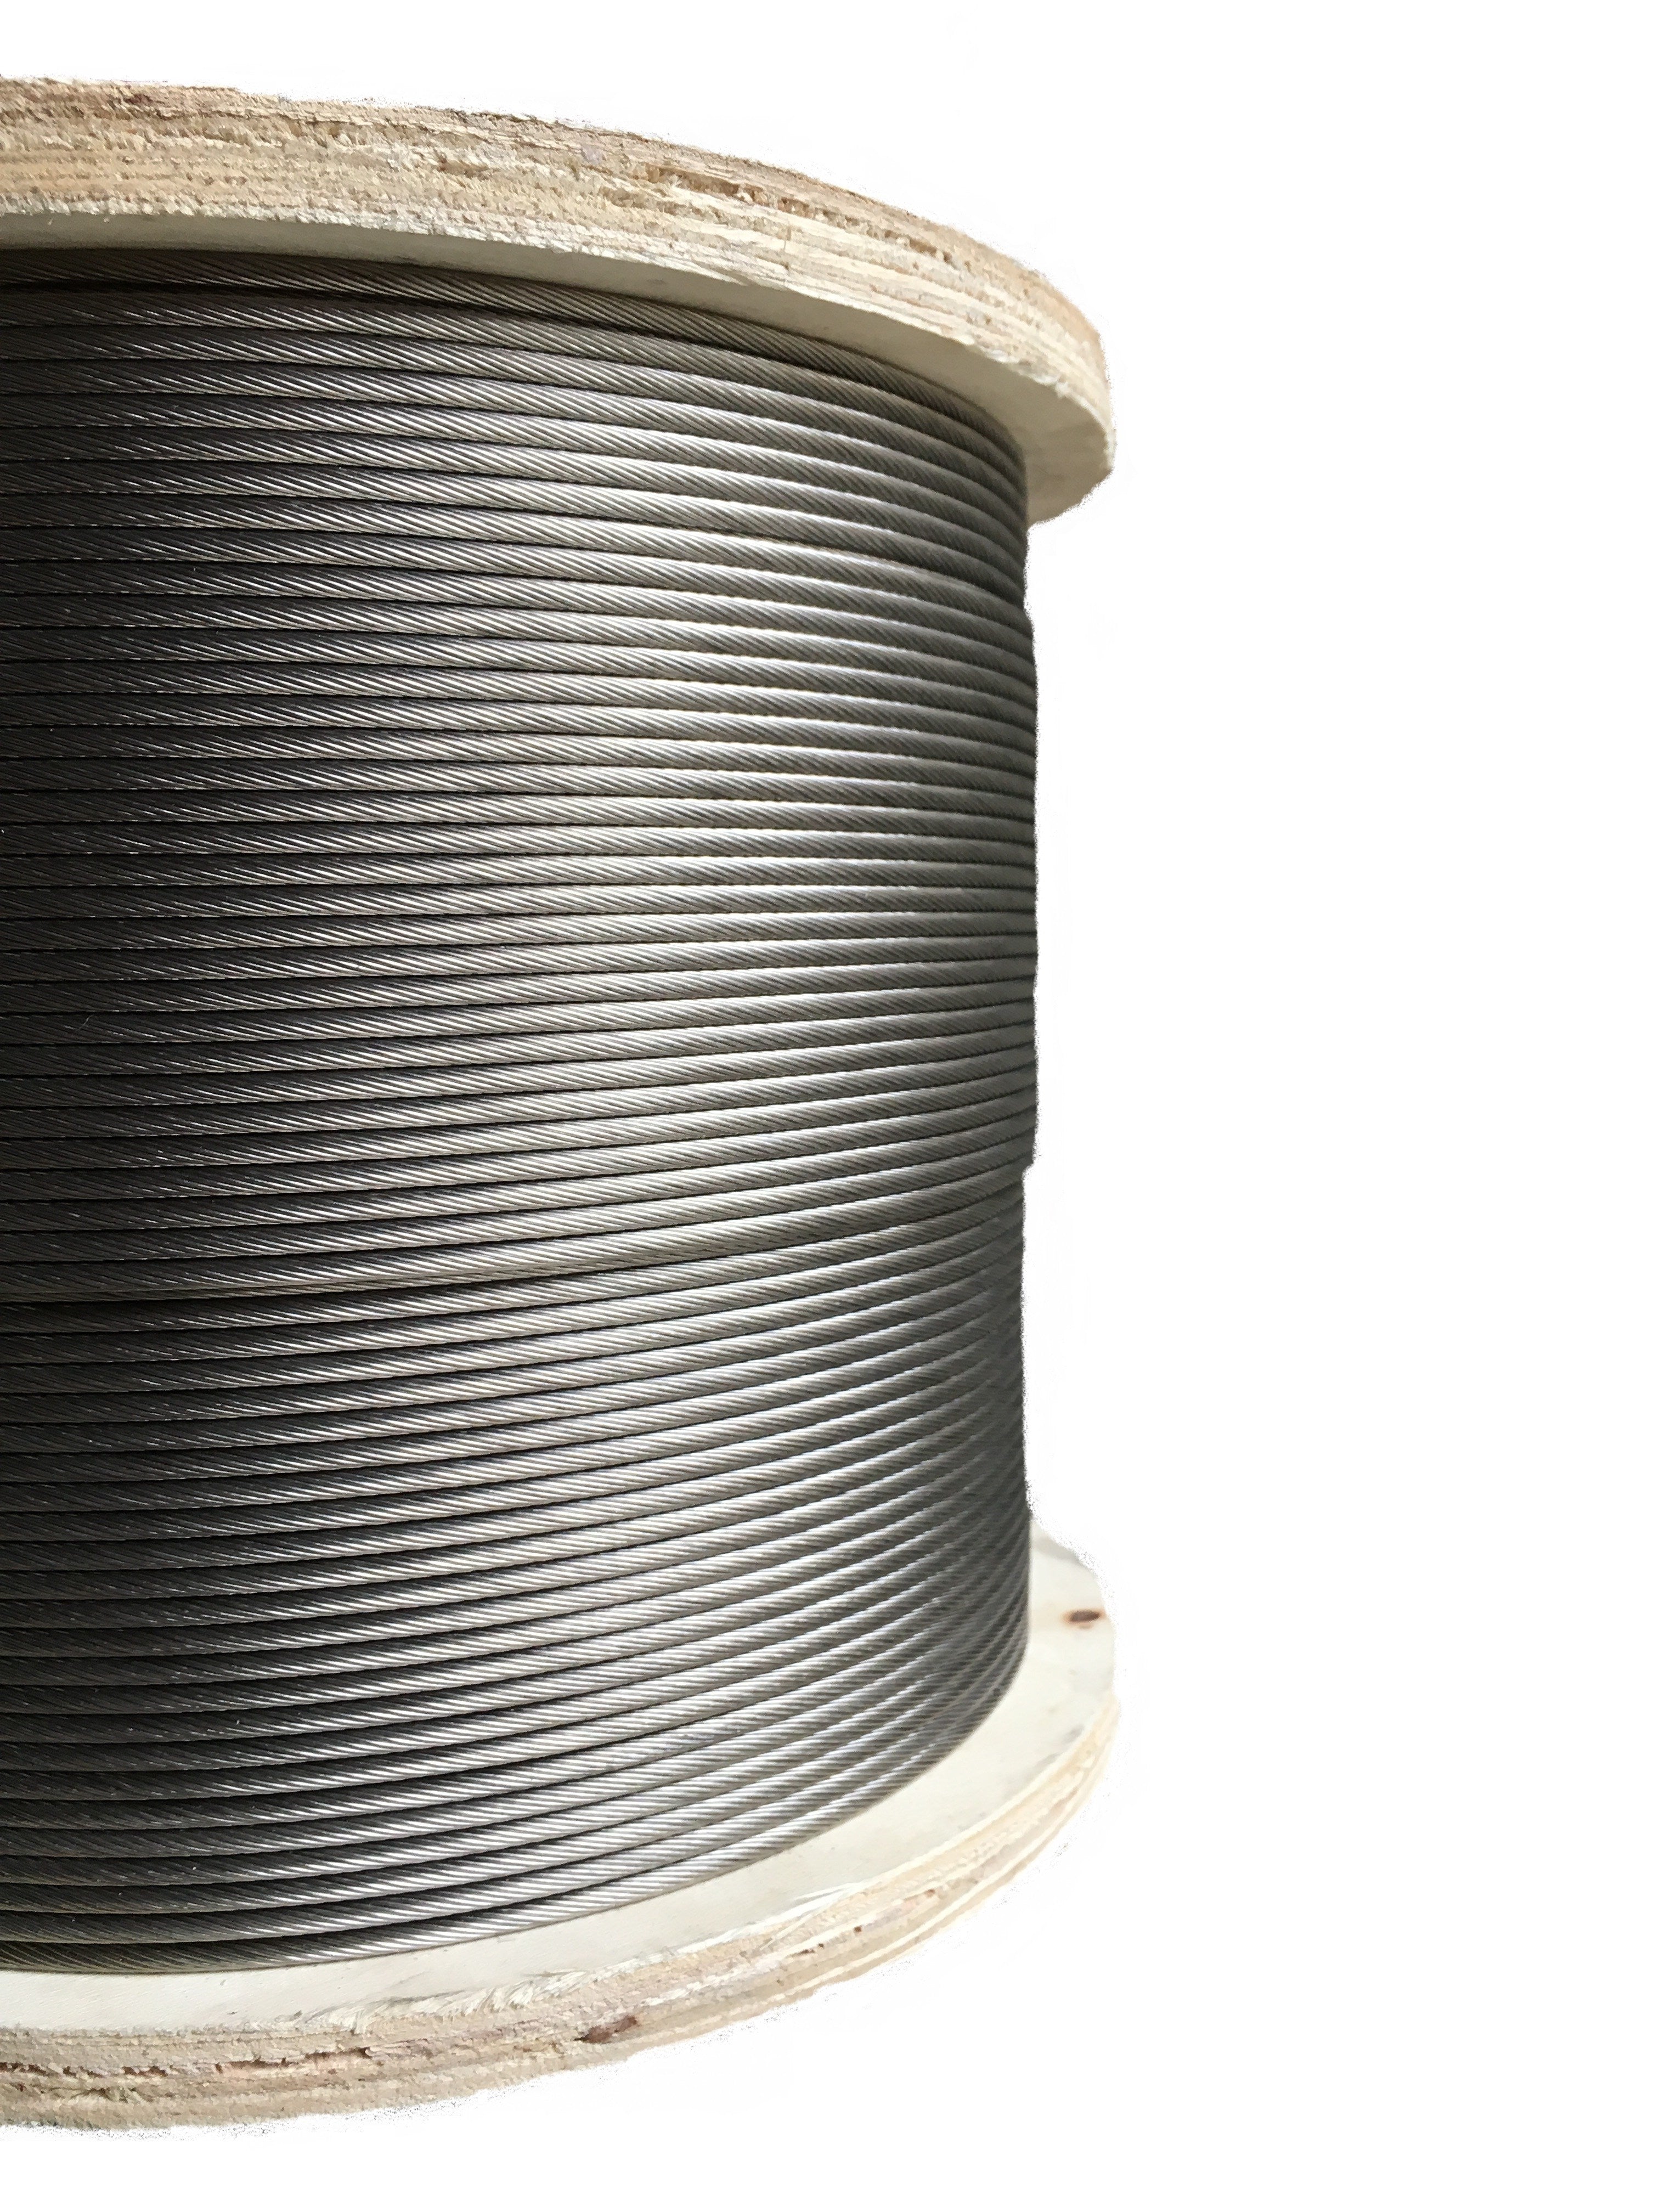 1000 ft. Reel 1x19 Stainless Steel Cable | PanoRAIL 1/8